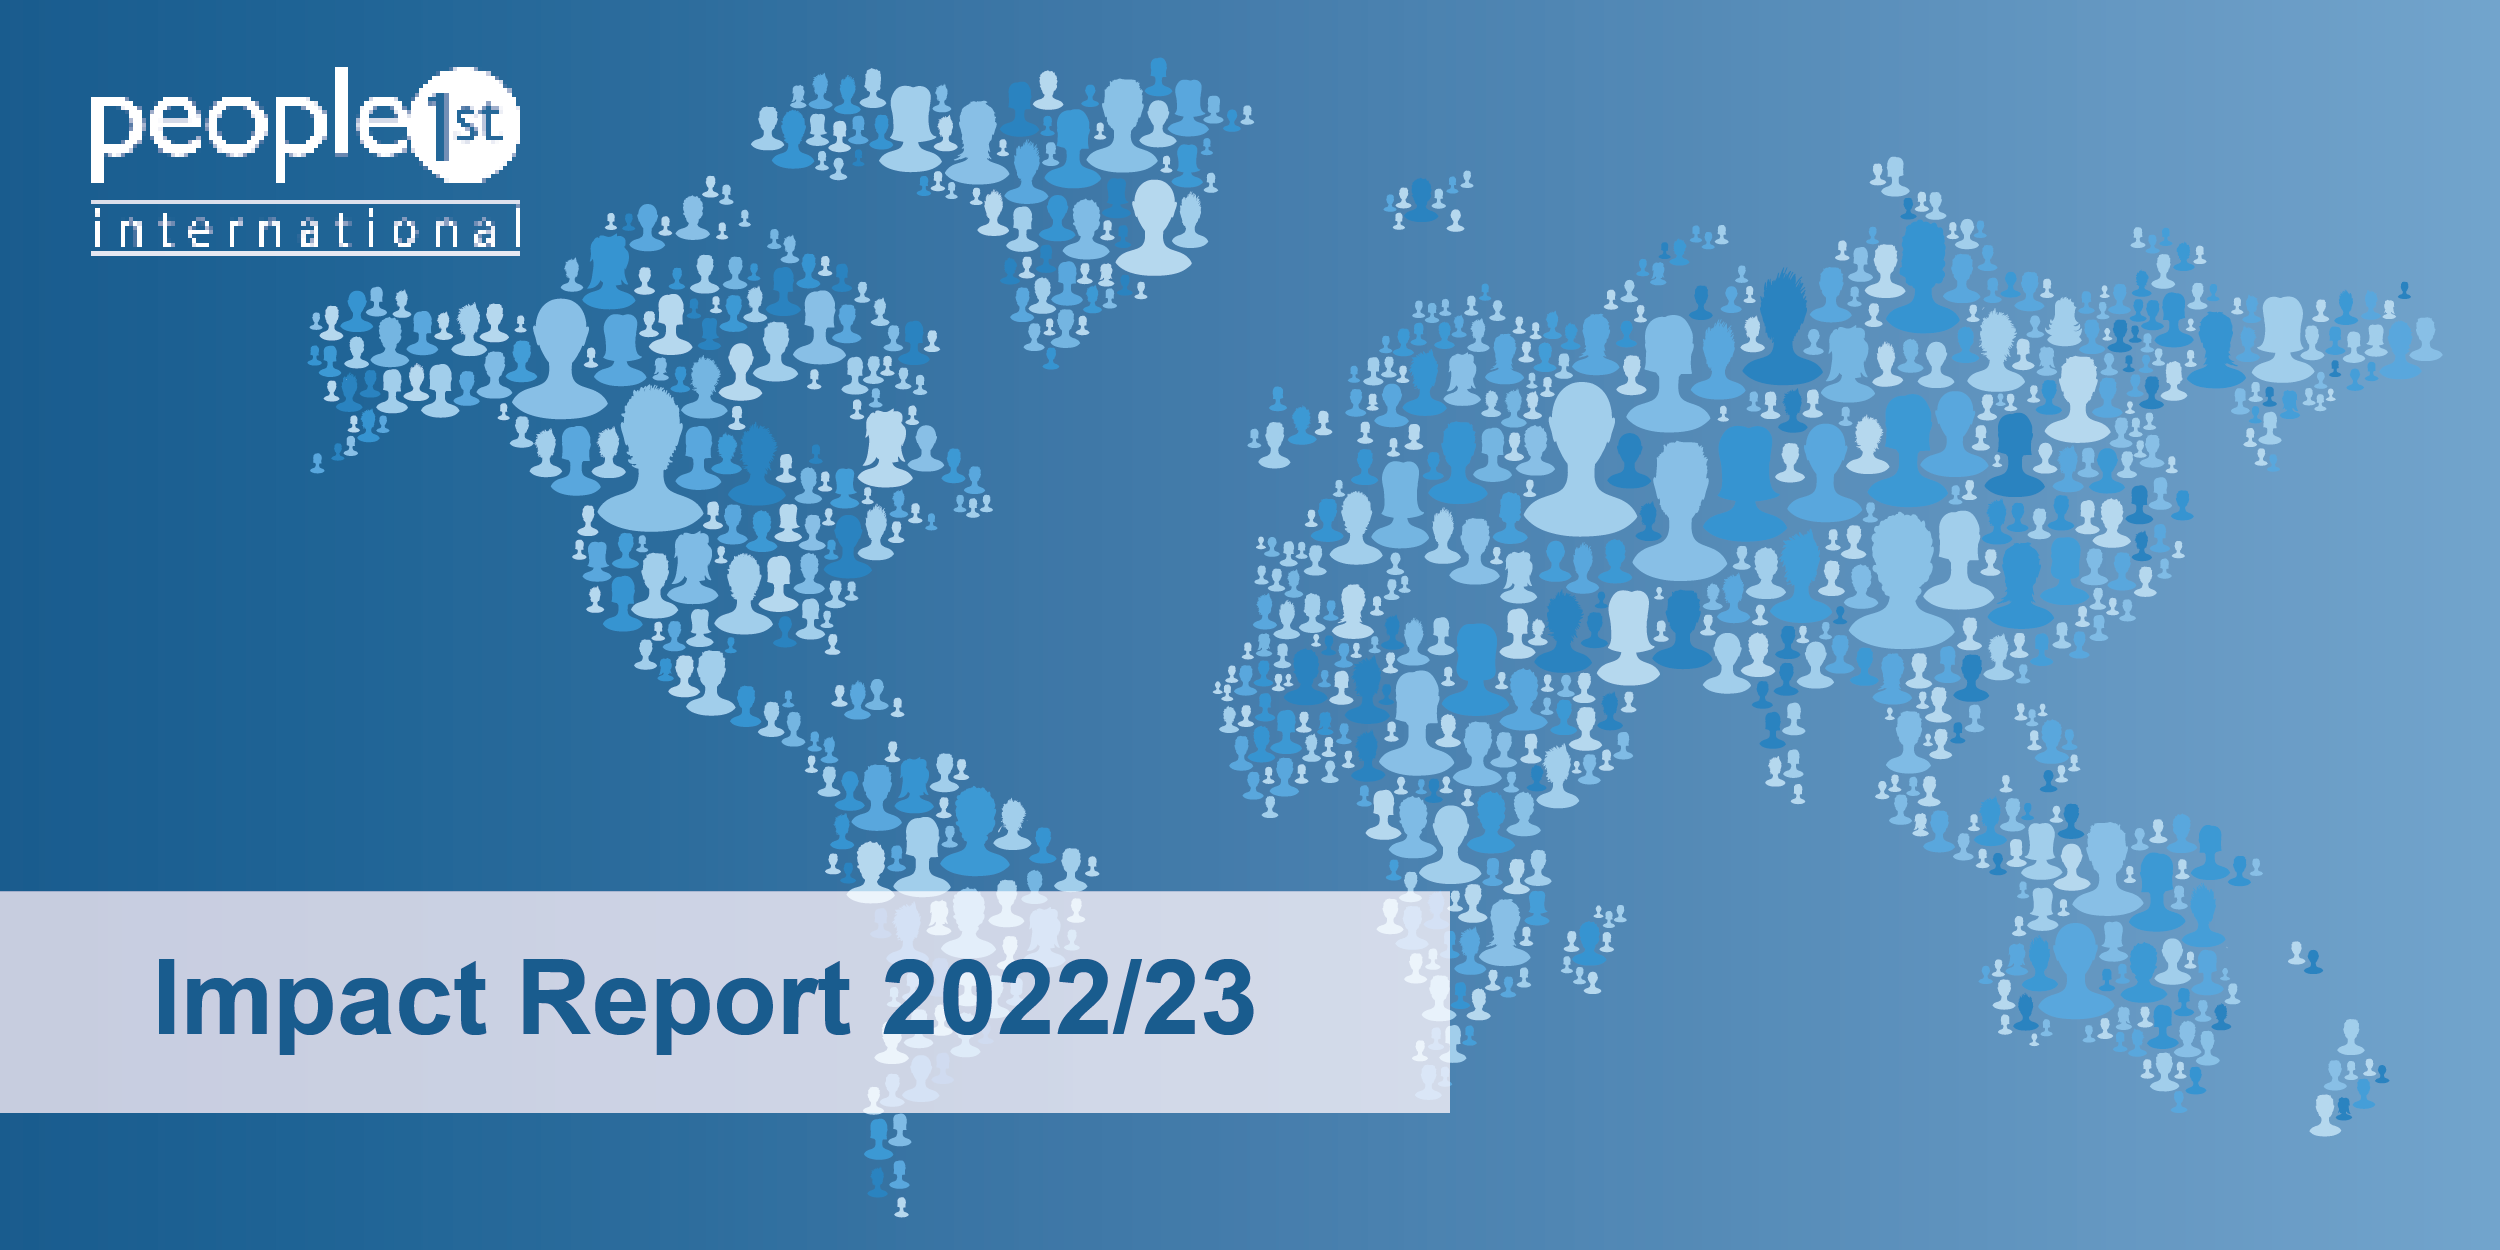 Our global impact 2022/23